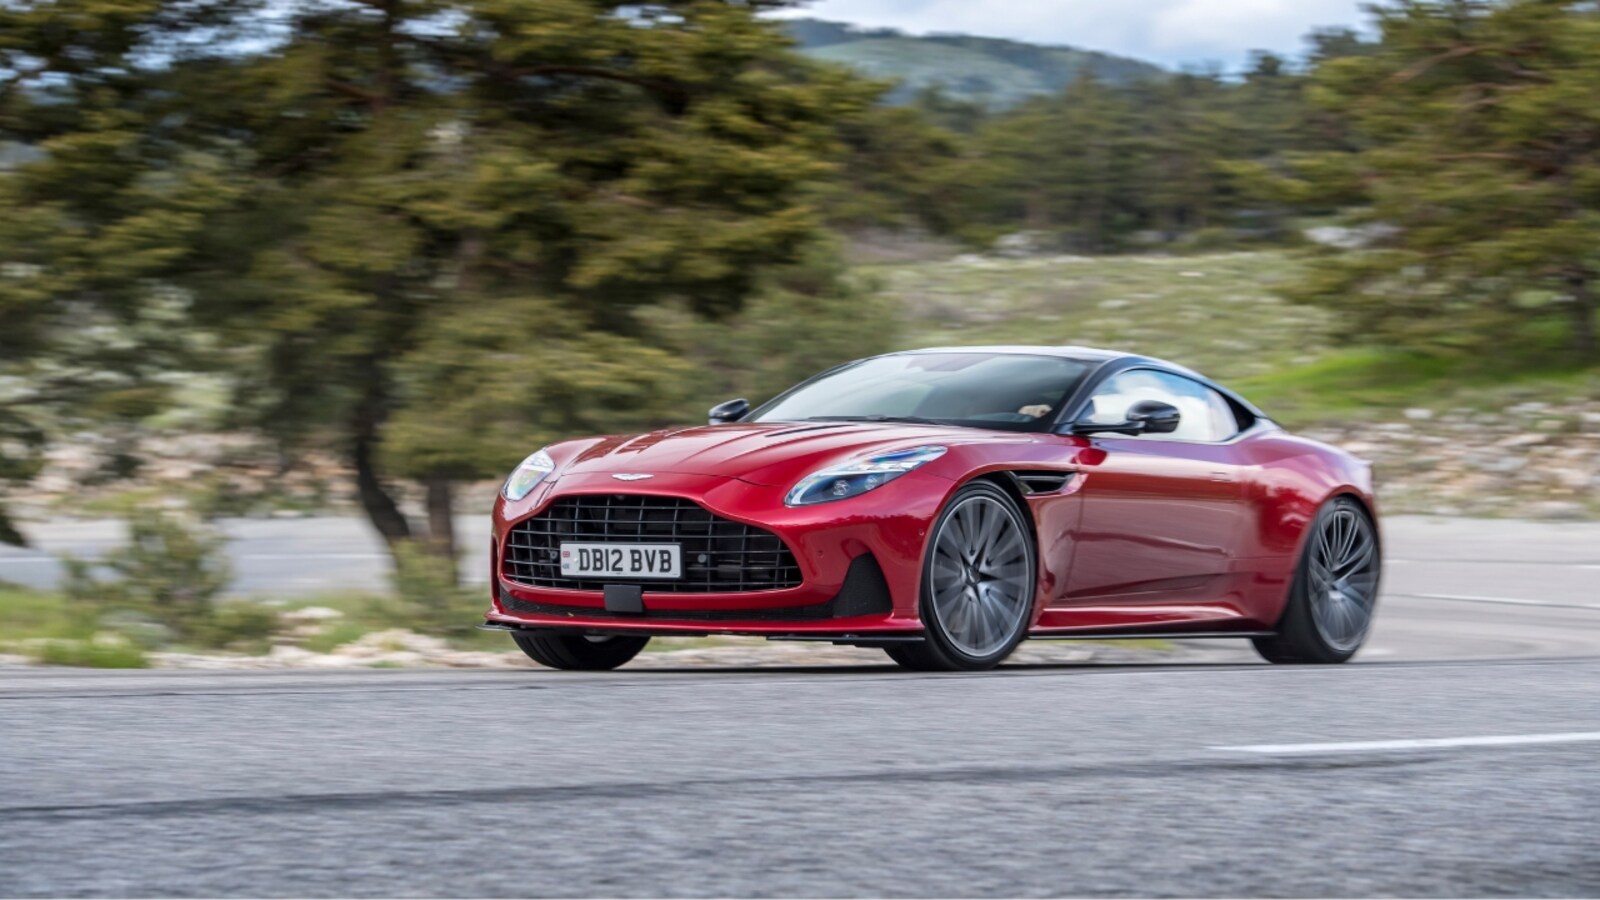 Aston Martin to roll out DB12 in India today: What we know so far